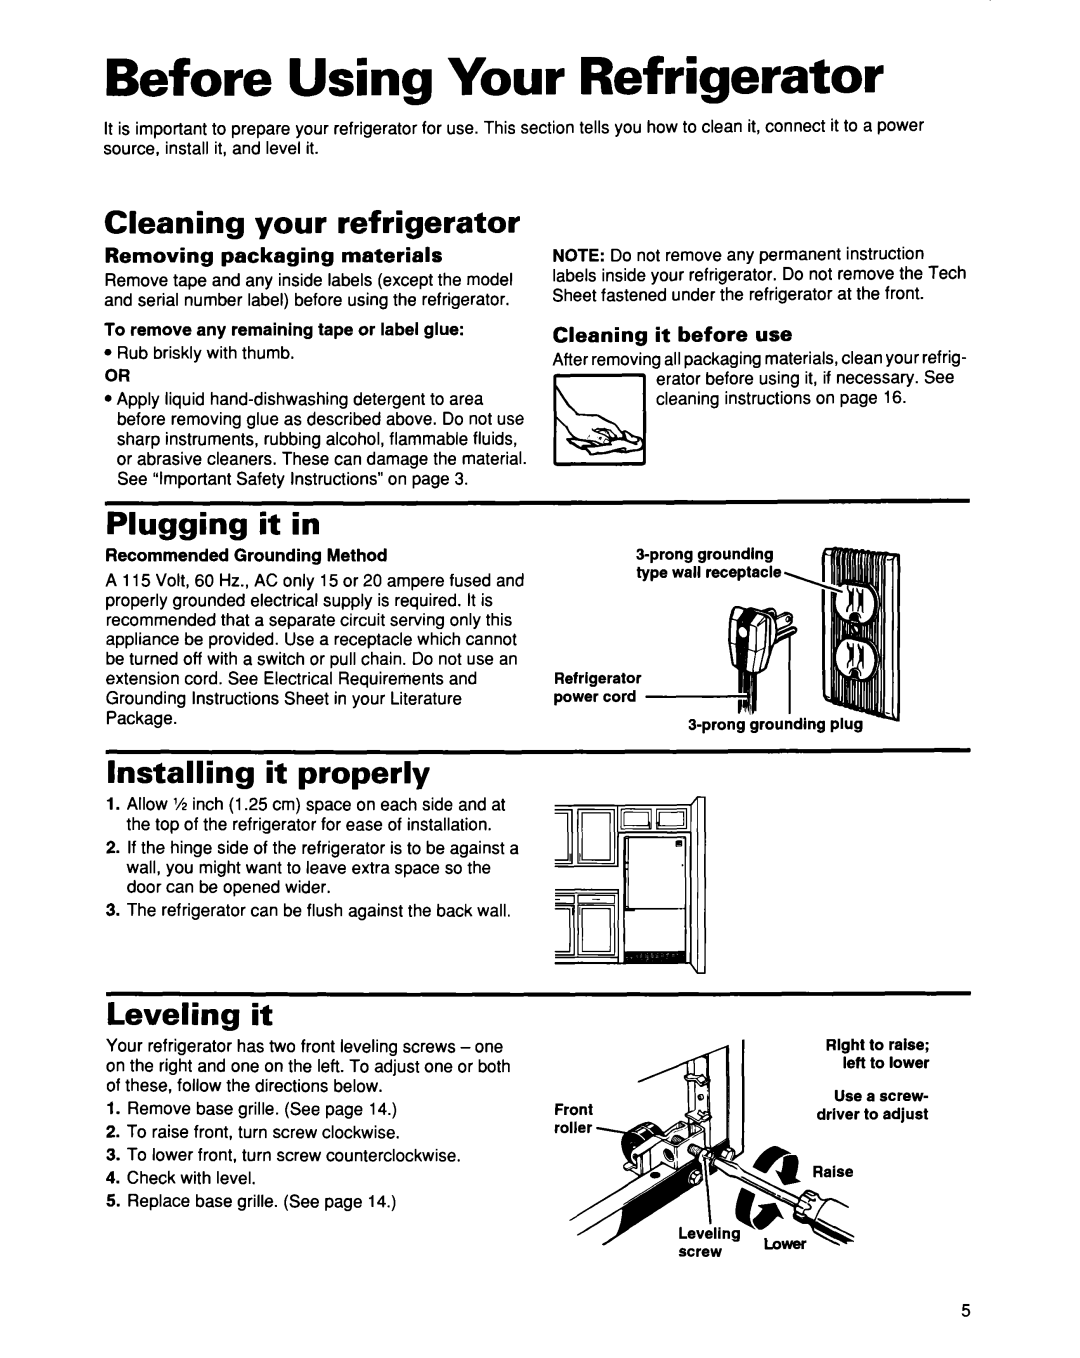 Whirlpool EB21DKXDB01 Before Using Your Refrigerator, Cleaning your refrigerator, Plugging it in, Installing it properly 